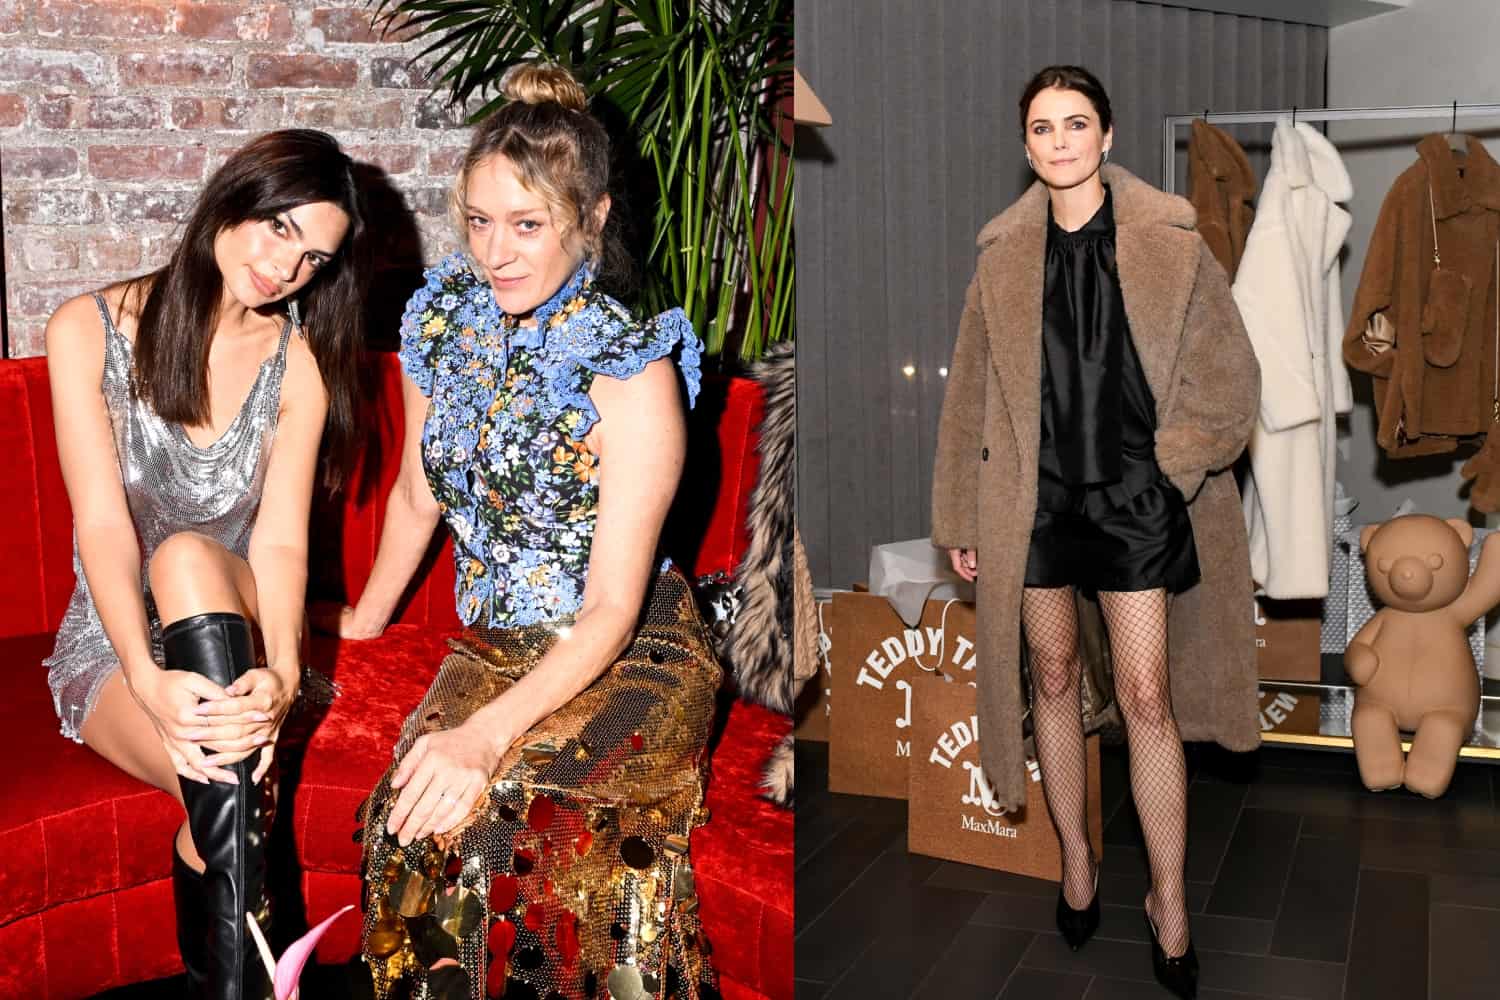 Inside The Rabanne x H&M Bash, Out To Dinner With Max Mara & Nordstrom, Plus! Alice + Olivia’s Basquiat Collection Launch…